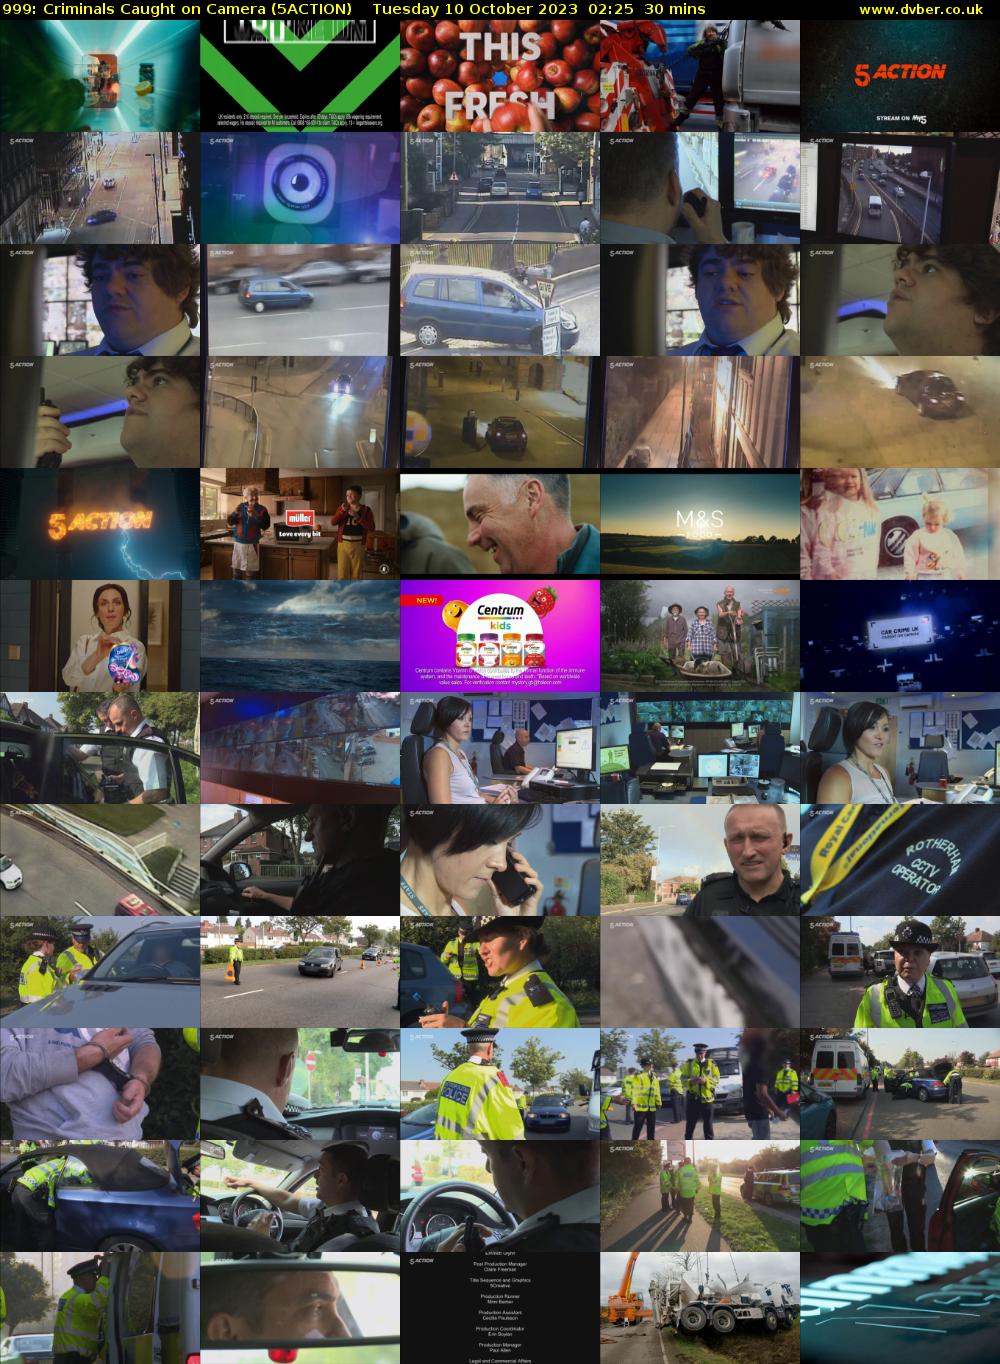 999: Criminals Caught on Camera (5ACTION) Tuesday 10 October 2023 02:25 - 02:55